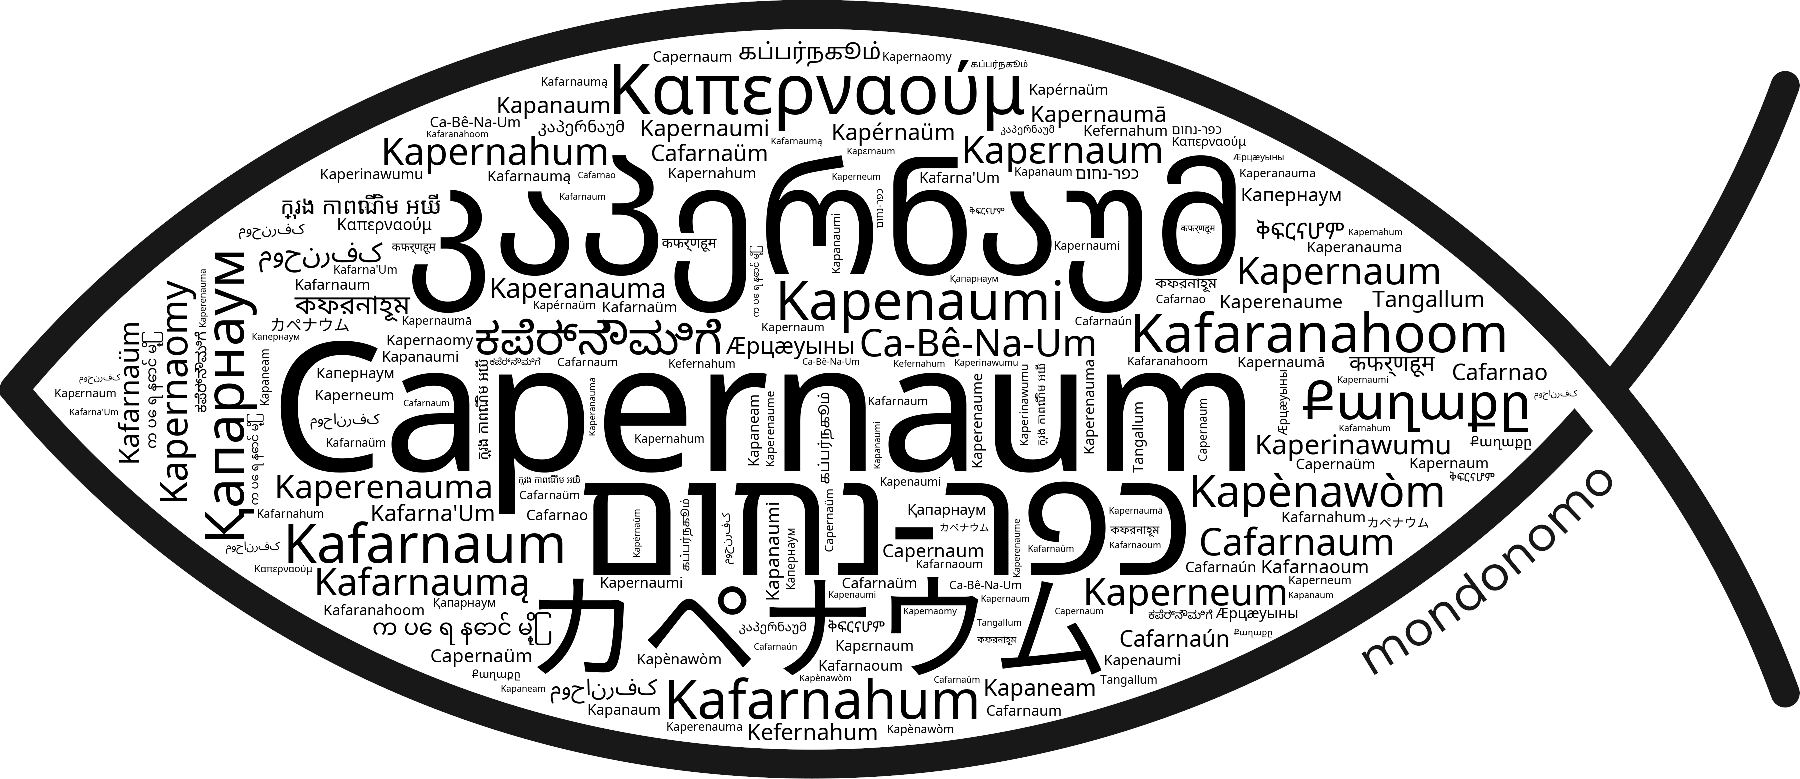 Name Capernaum in the world's Bibles